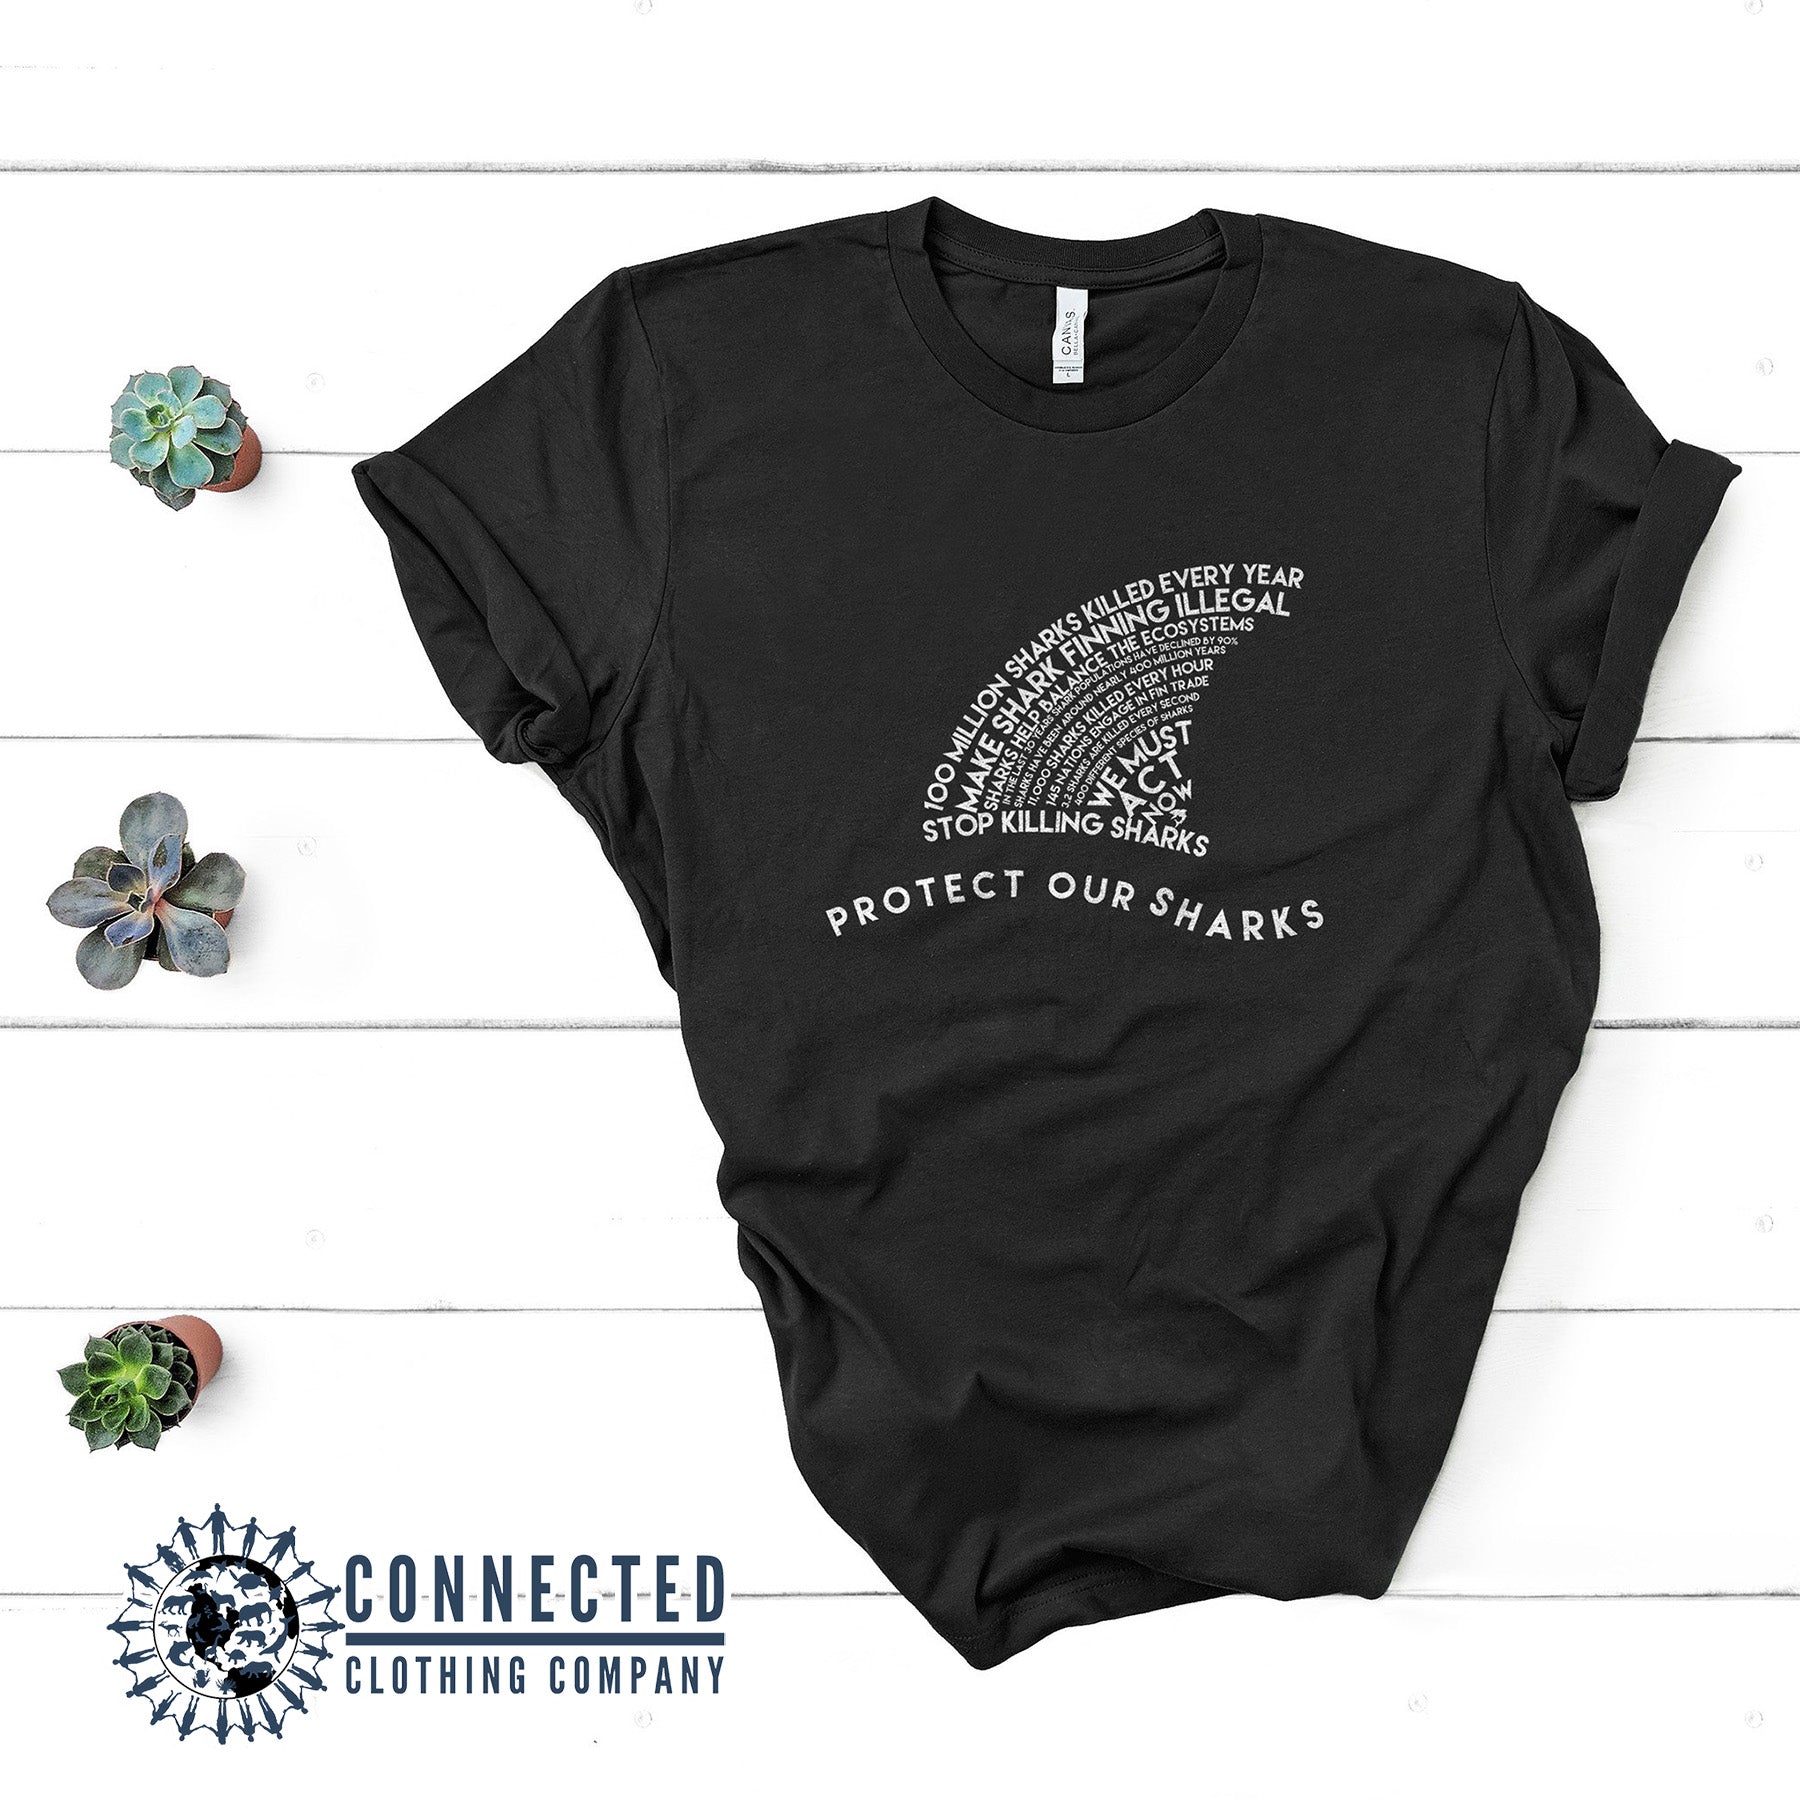 Black Protect Our Sharks Short-Sleeve Tee - Connected Clothing Company - Ethically and Sustainably Made - 10% of profits donated to shark conservation and ocean conservation